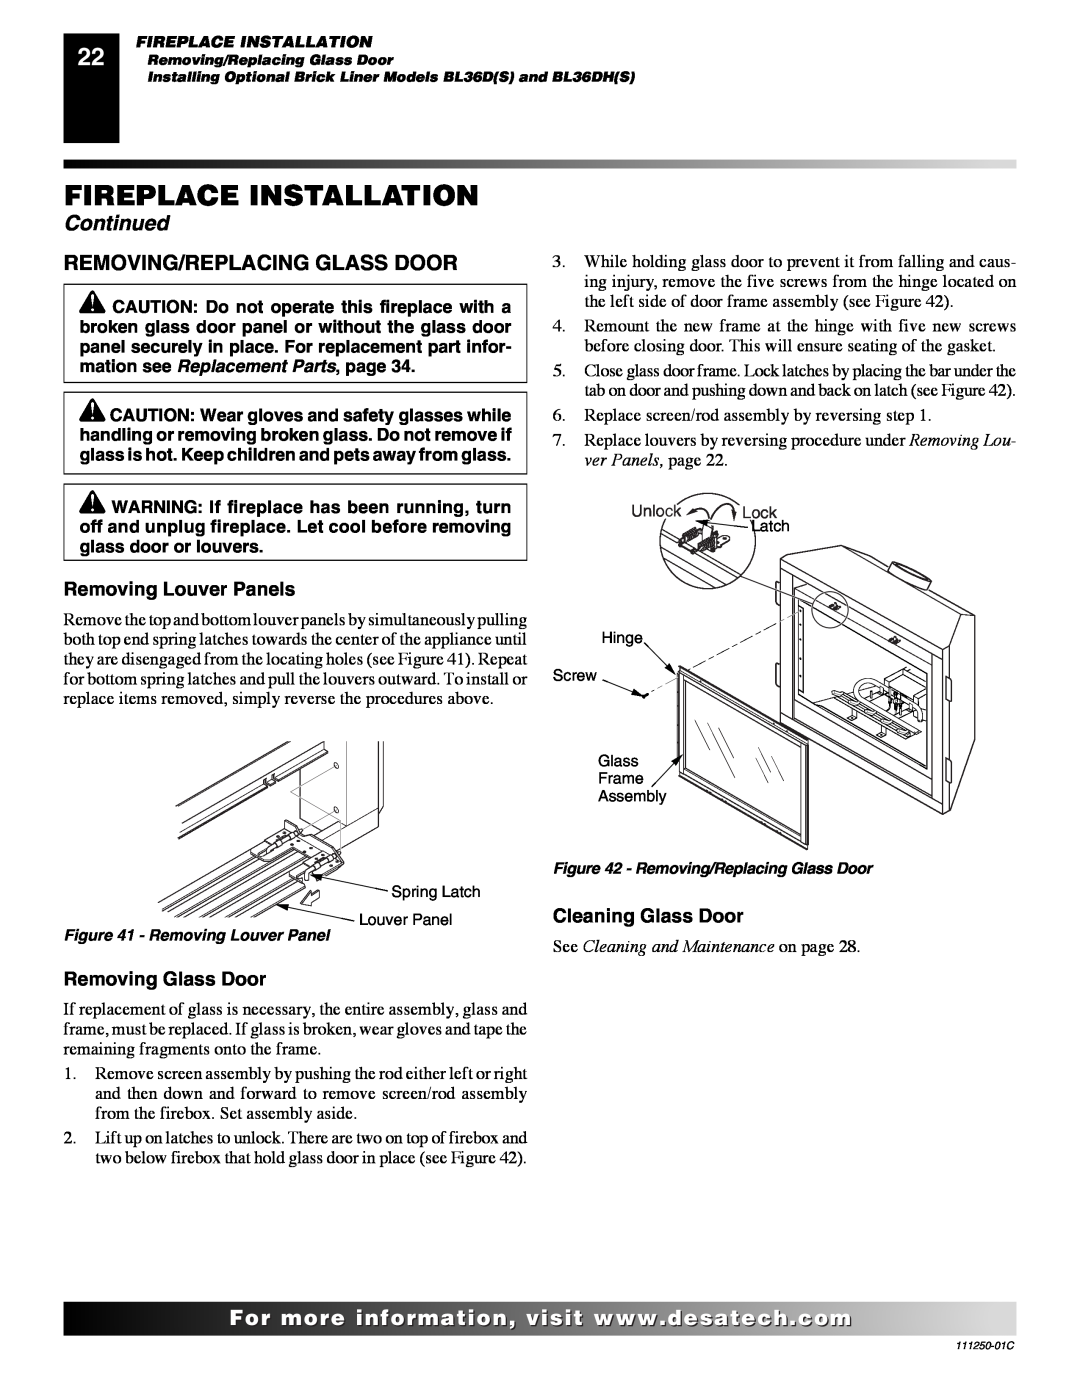 Desa (V)T36NA SERIES installation manual Removing/Replacing Glass Door, Fireplace Installation, Continued 